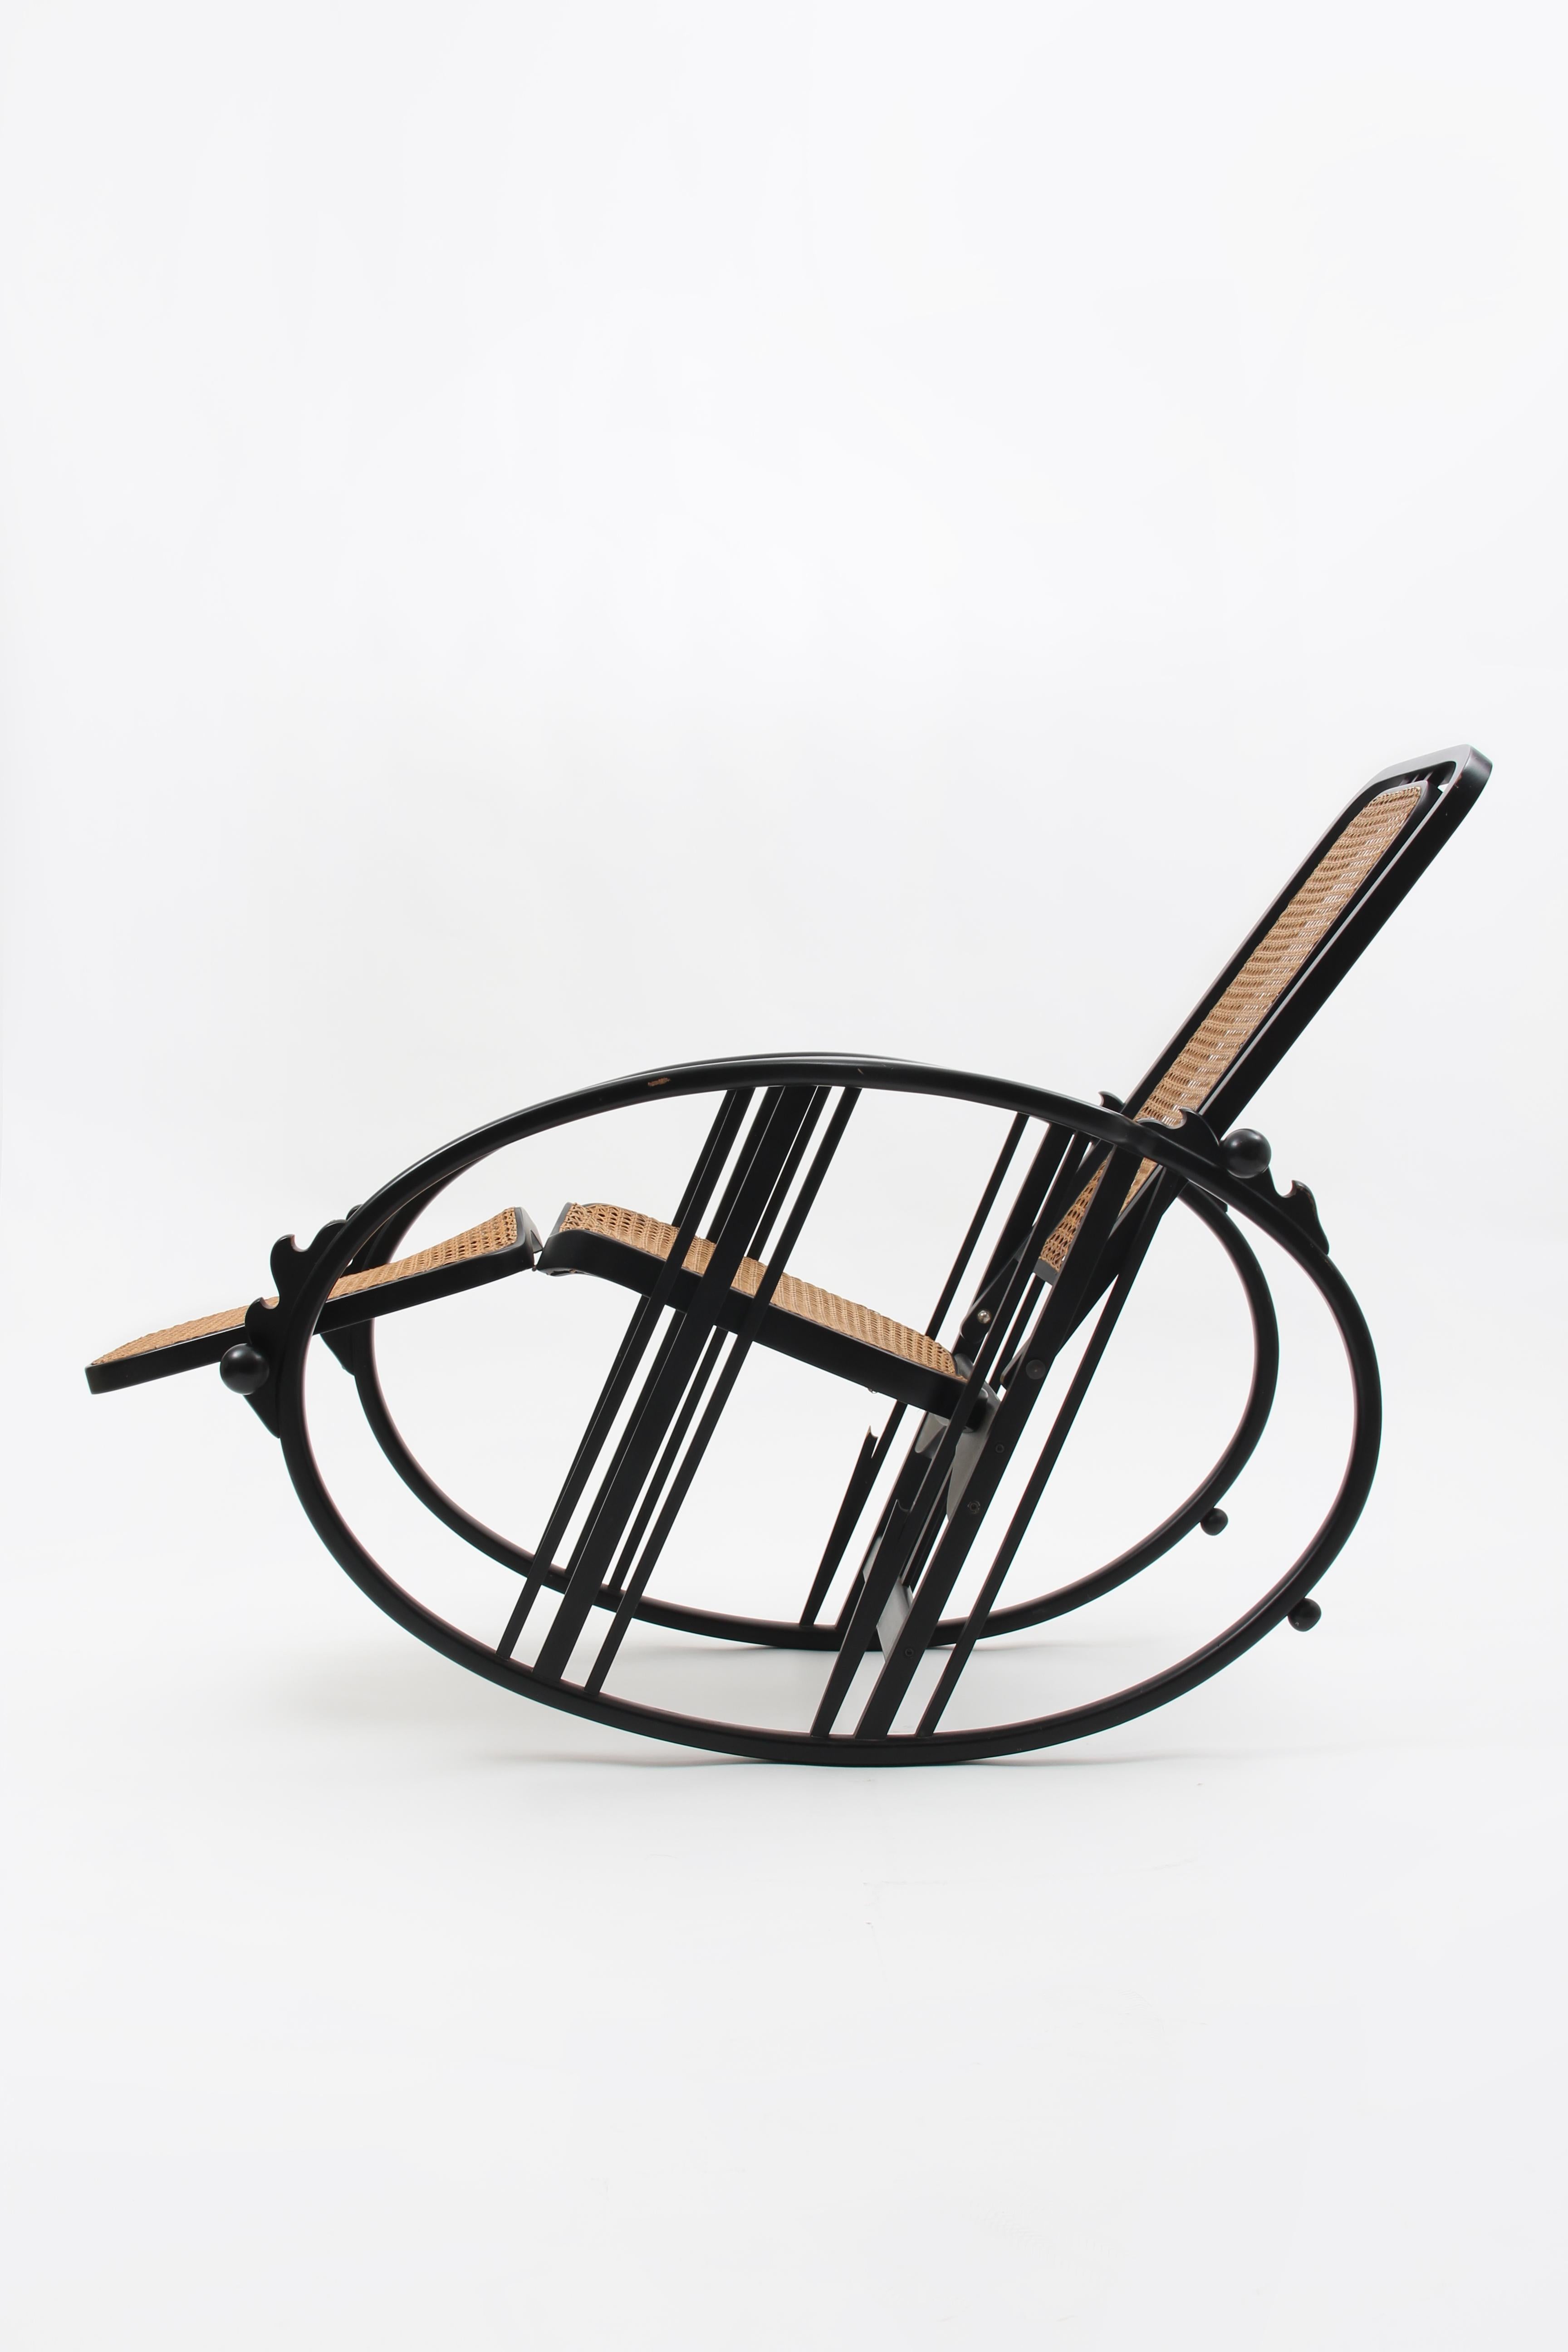 Egg Rocking Chair attributed to Josef Hoffmann for Società Anonima Antonio Volpe, circa 1920.

Breathtaking, rare and elegant rocking chair.
Black lacquered beech bentwood and viennese woven rattan, multi-adjustable backrest and the fold-out